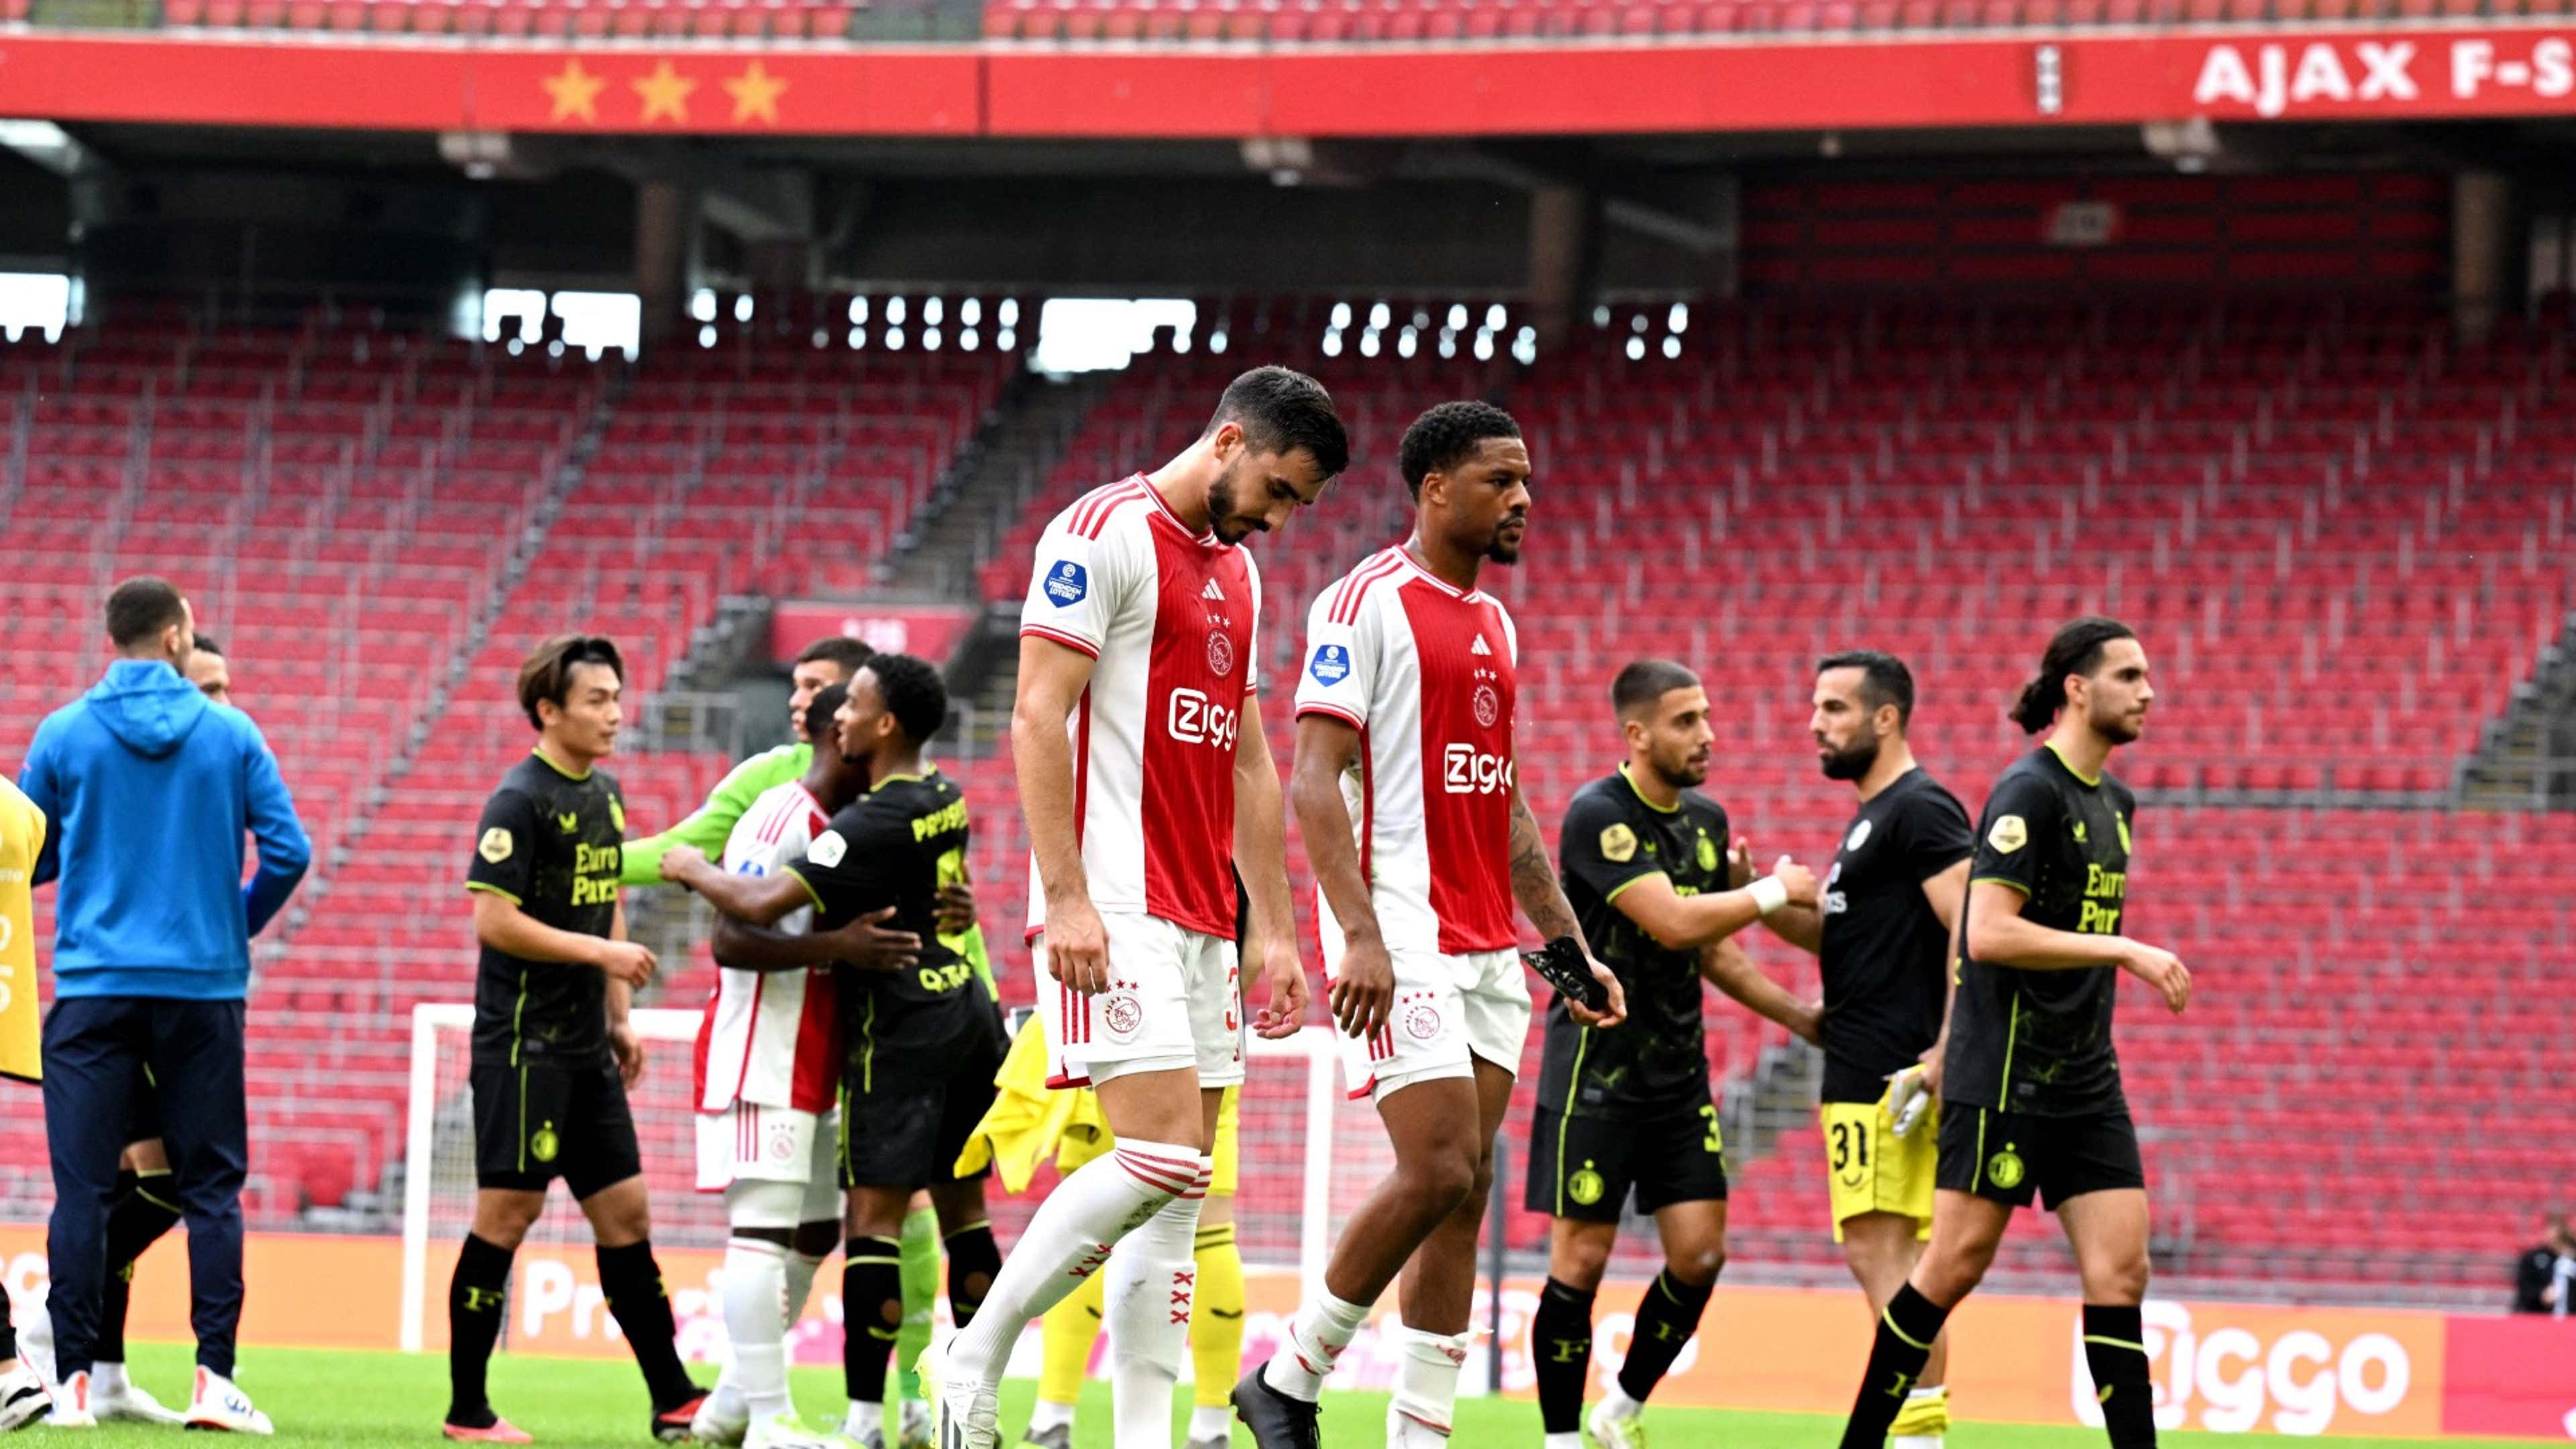 Ajax hit rock bottom! Dutch giants see Utrecht clash suspended twice for  crowd disorder - before 4-3 defeat confirms worst run of results since 1954